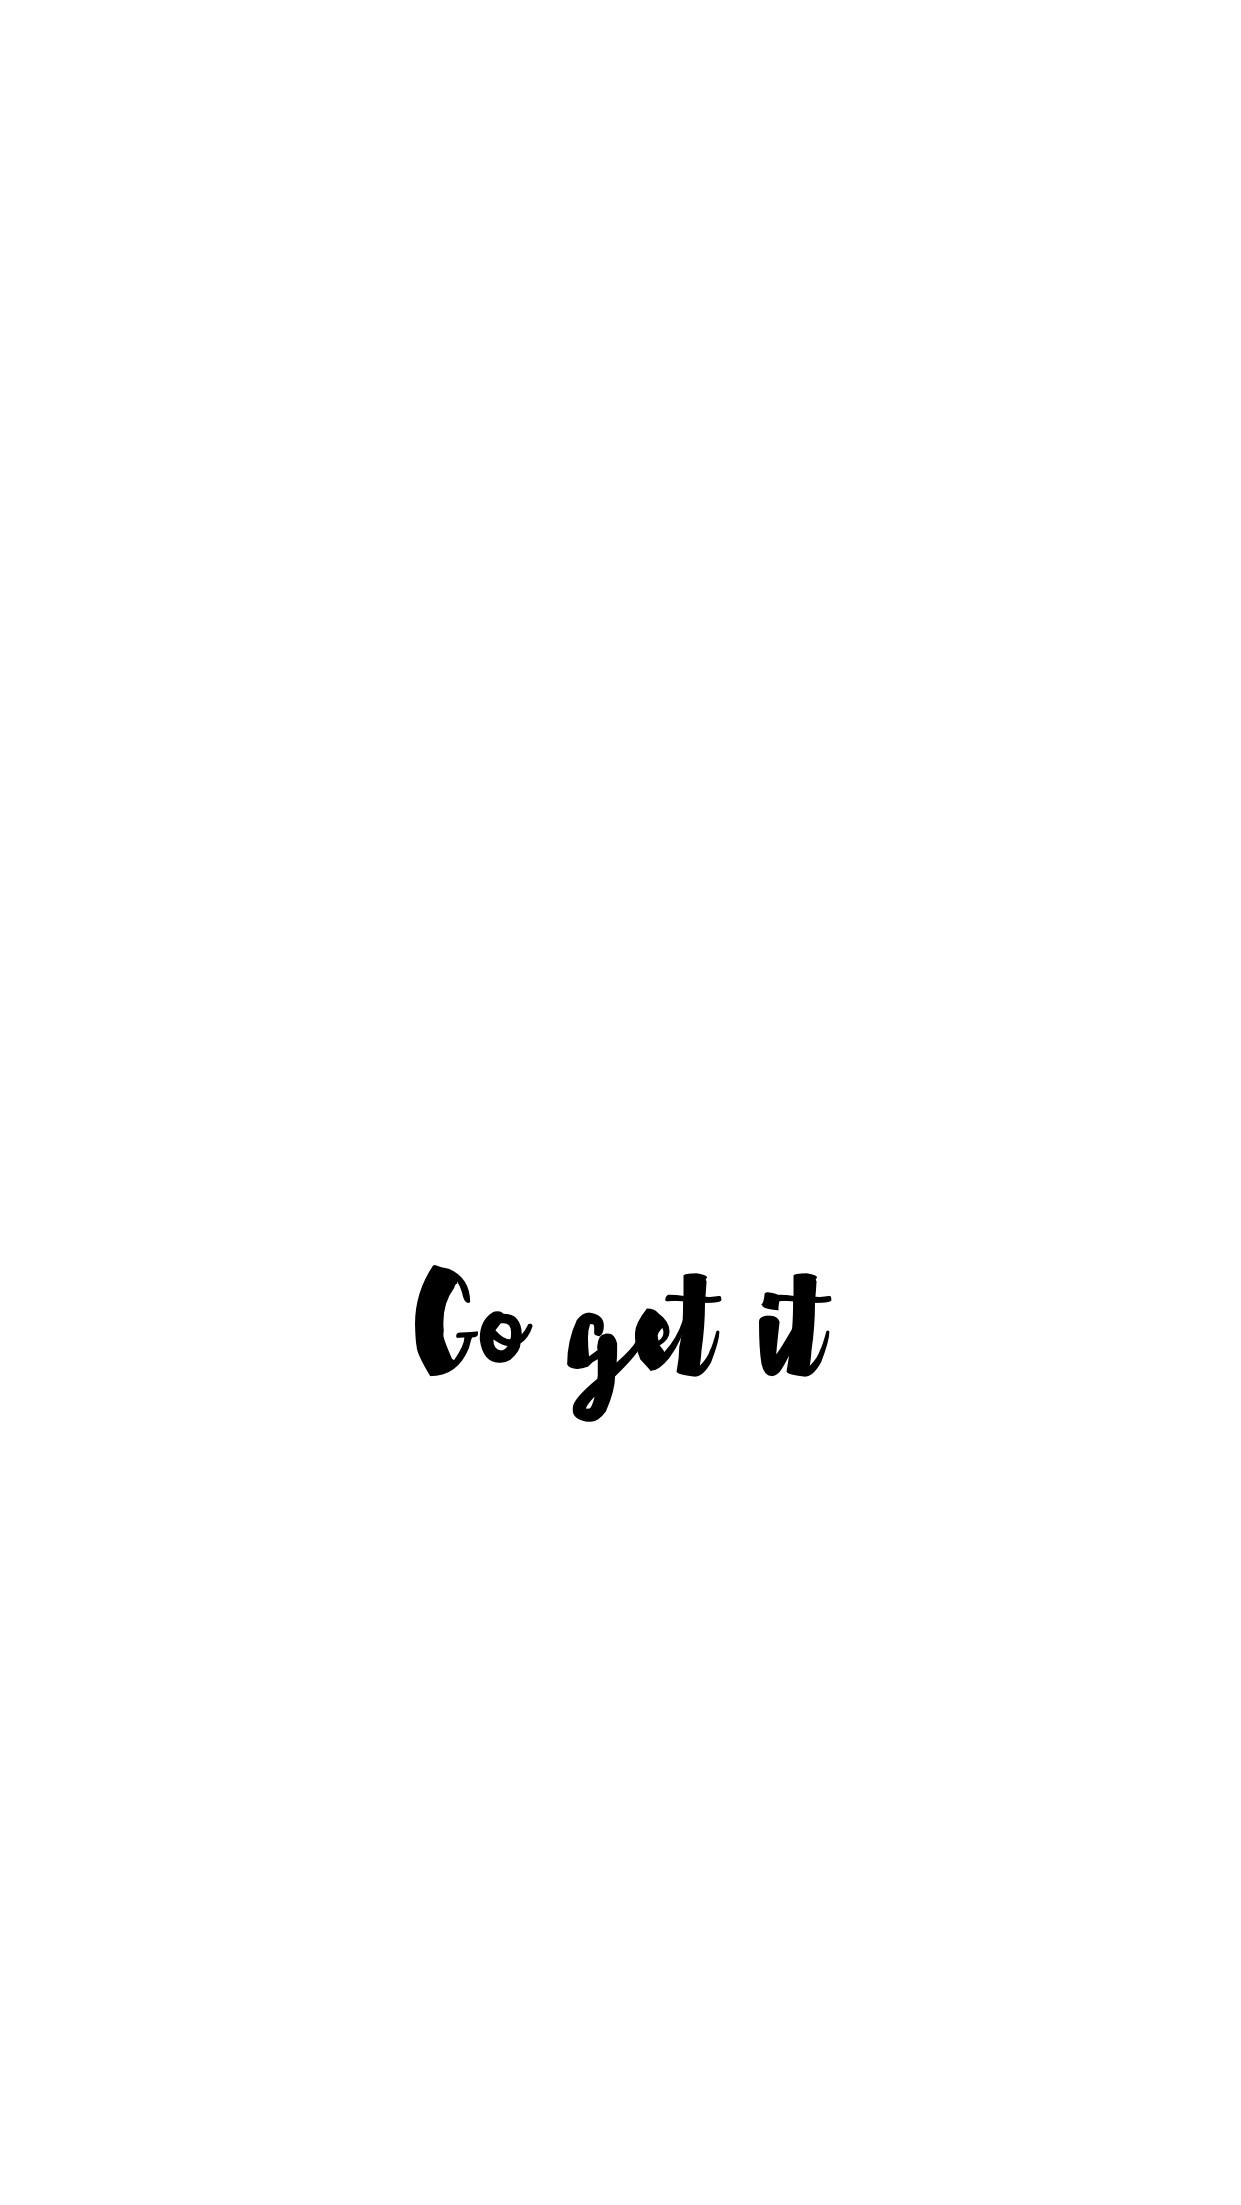 Quote, inspiration, wallpaper, background, minimal, white, black, simple,